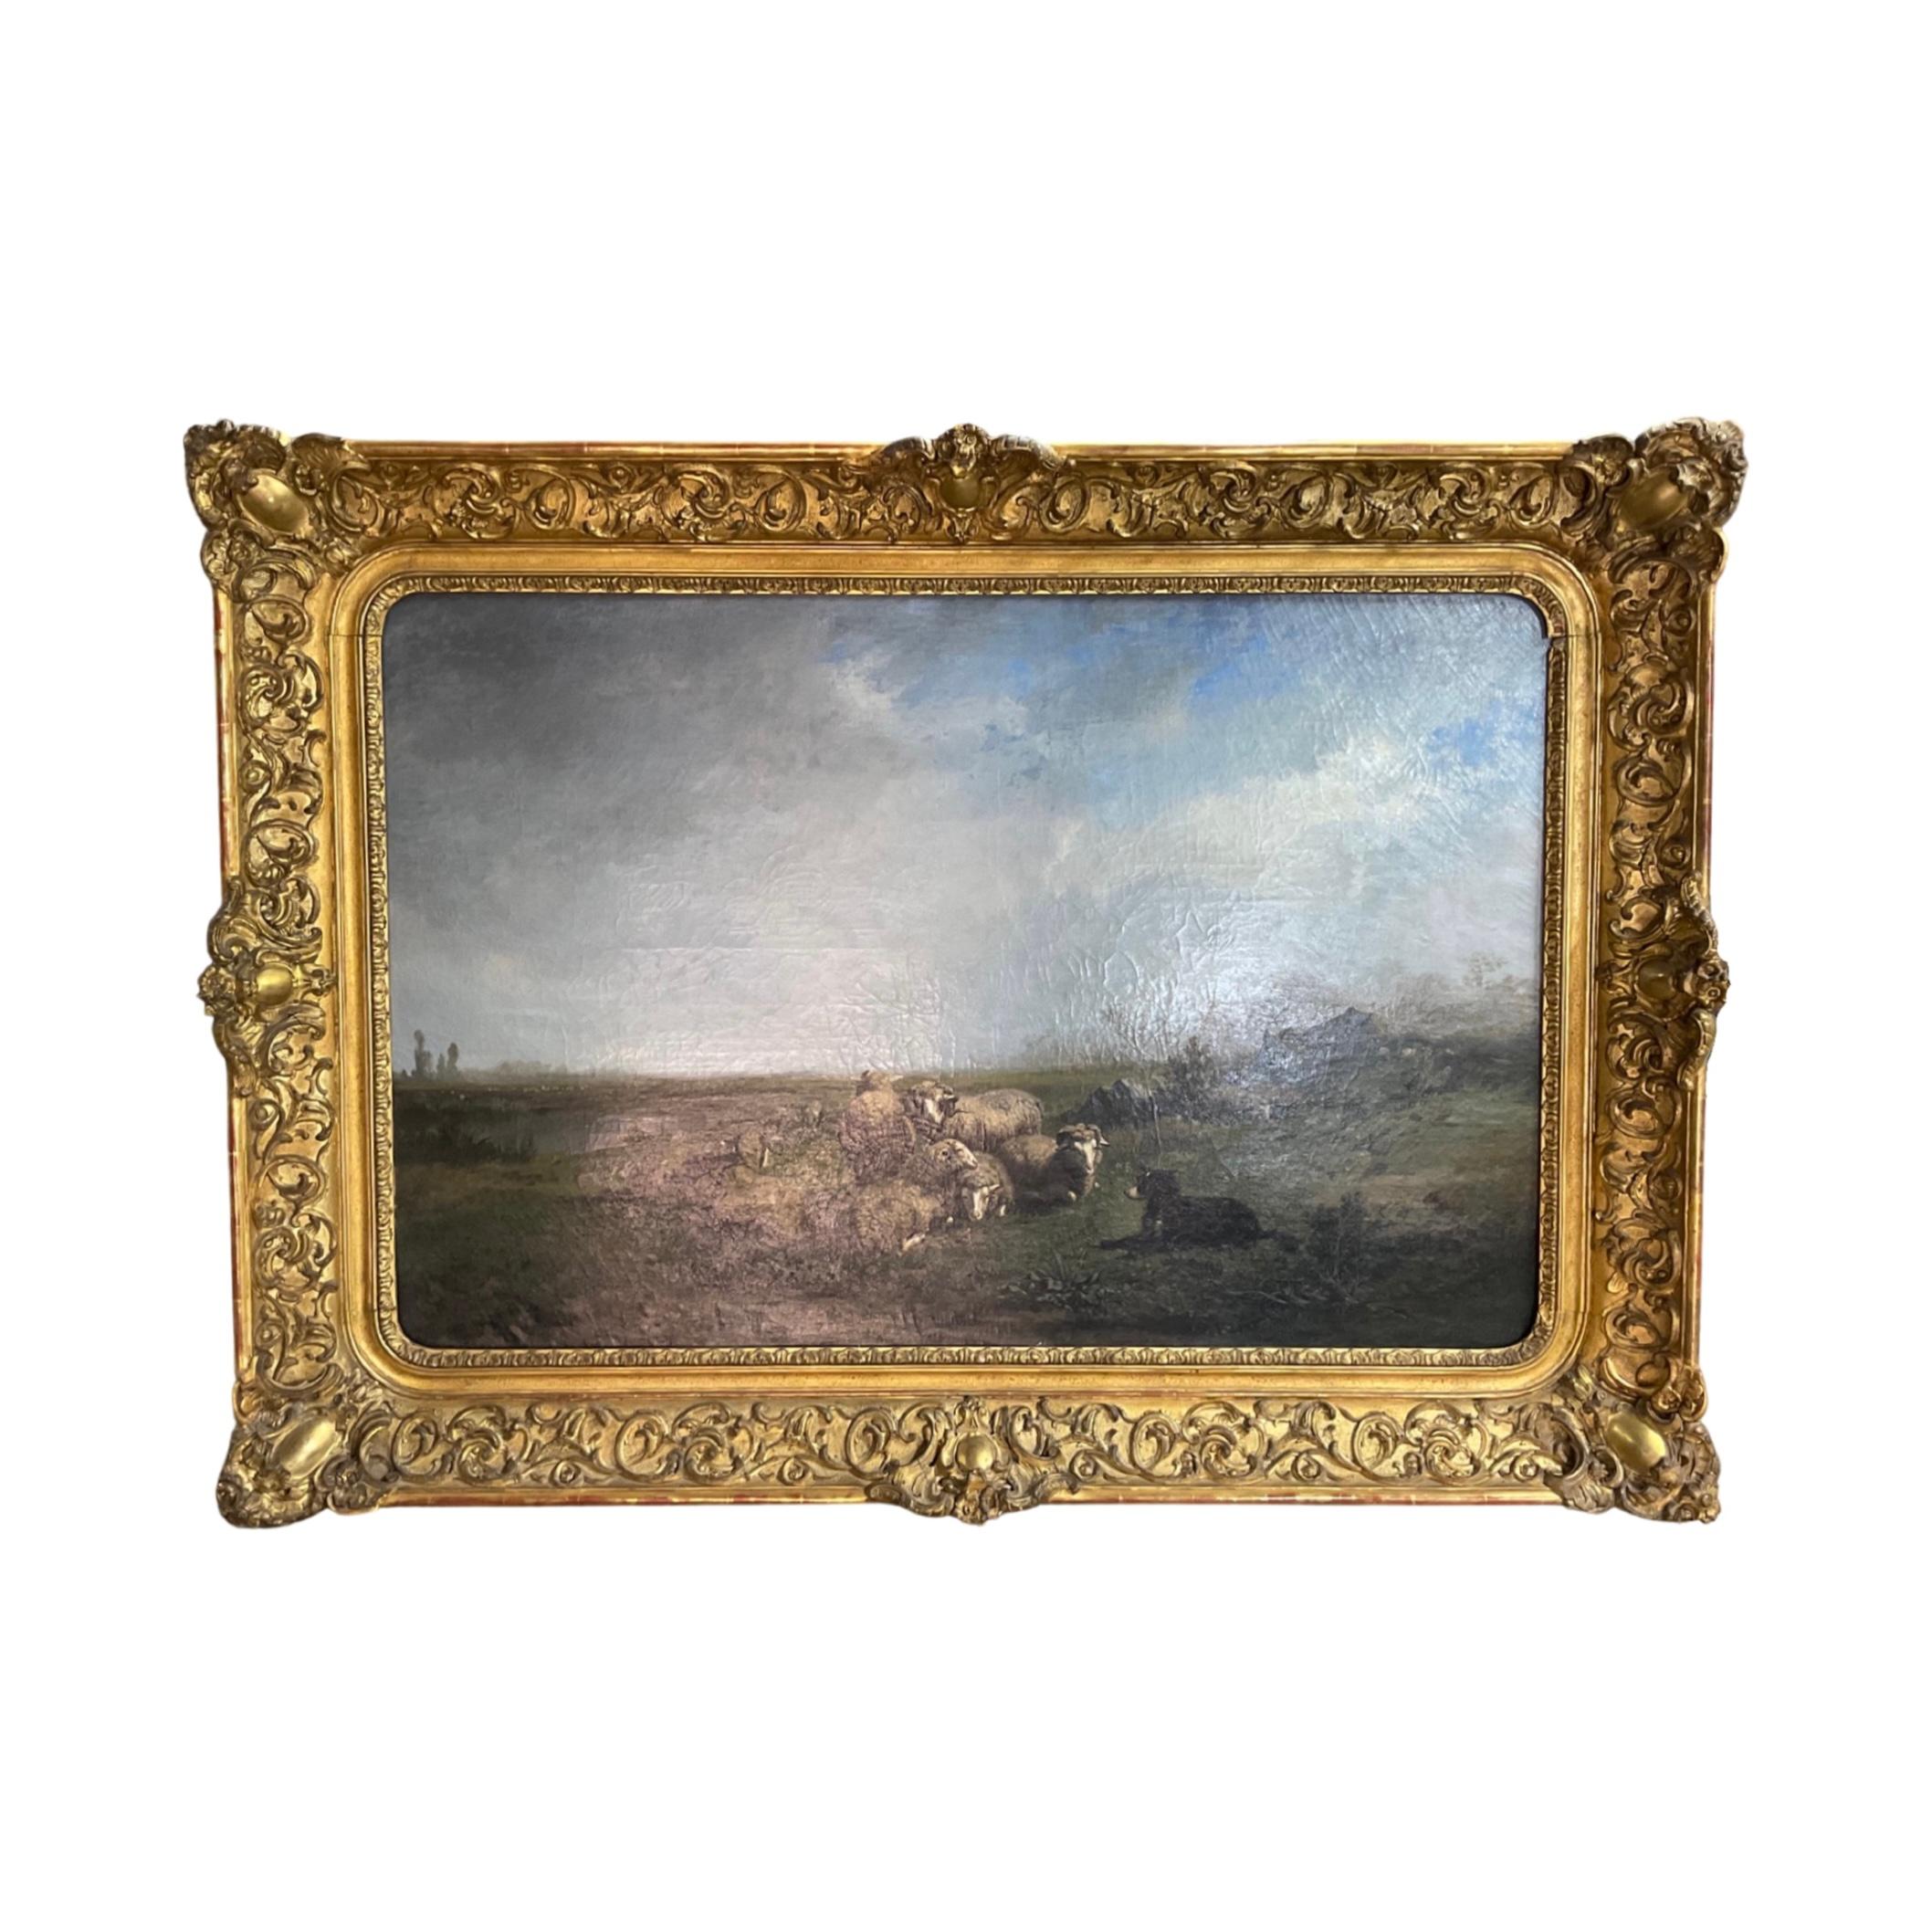 This stunning 18th century French painting features a luxurious gold-leaf frame. The beautiful and detailed artwork showcases animals lounging in the fields, creating a tranquil scene. Perfect for bringing a touch of classic elegance to any home.